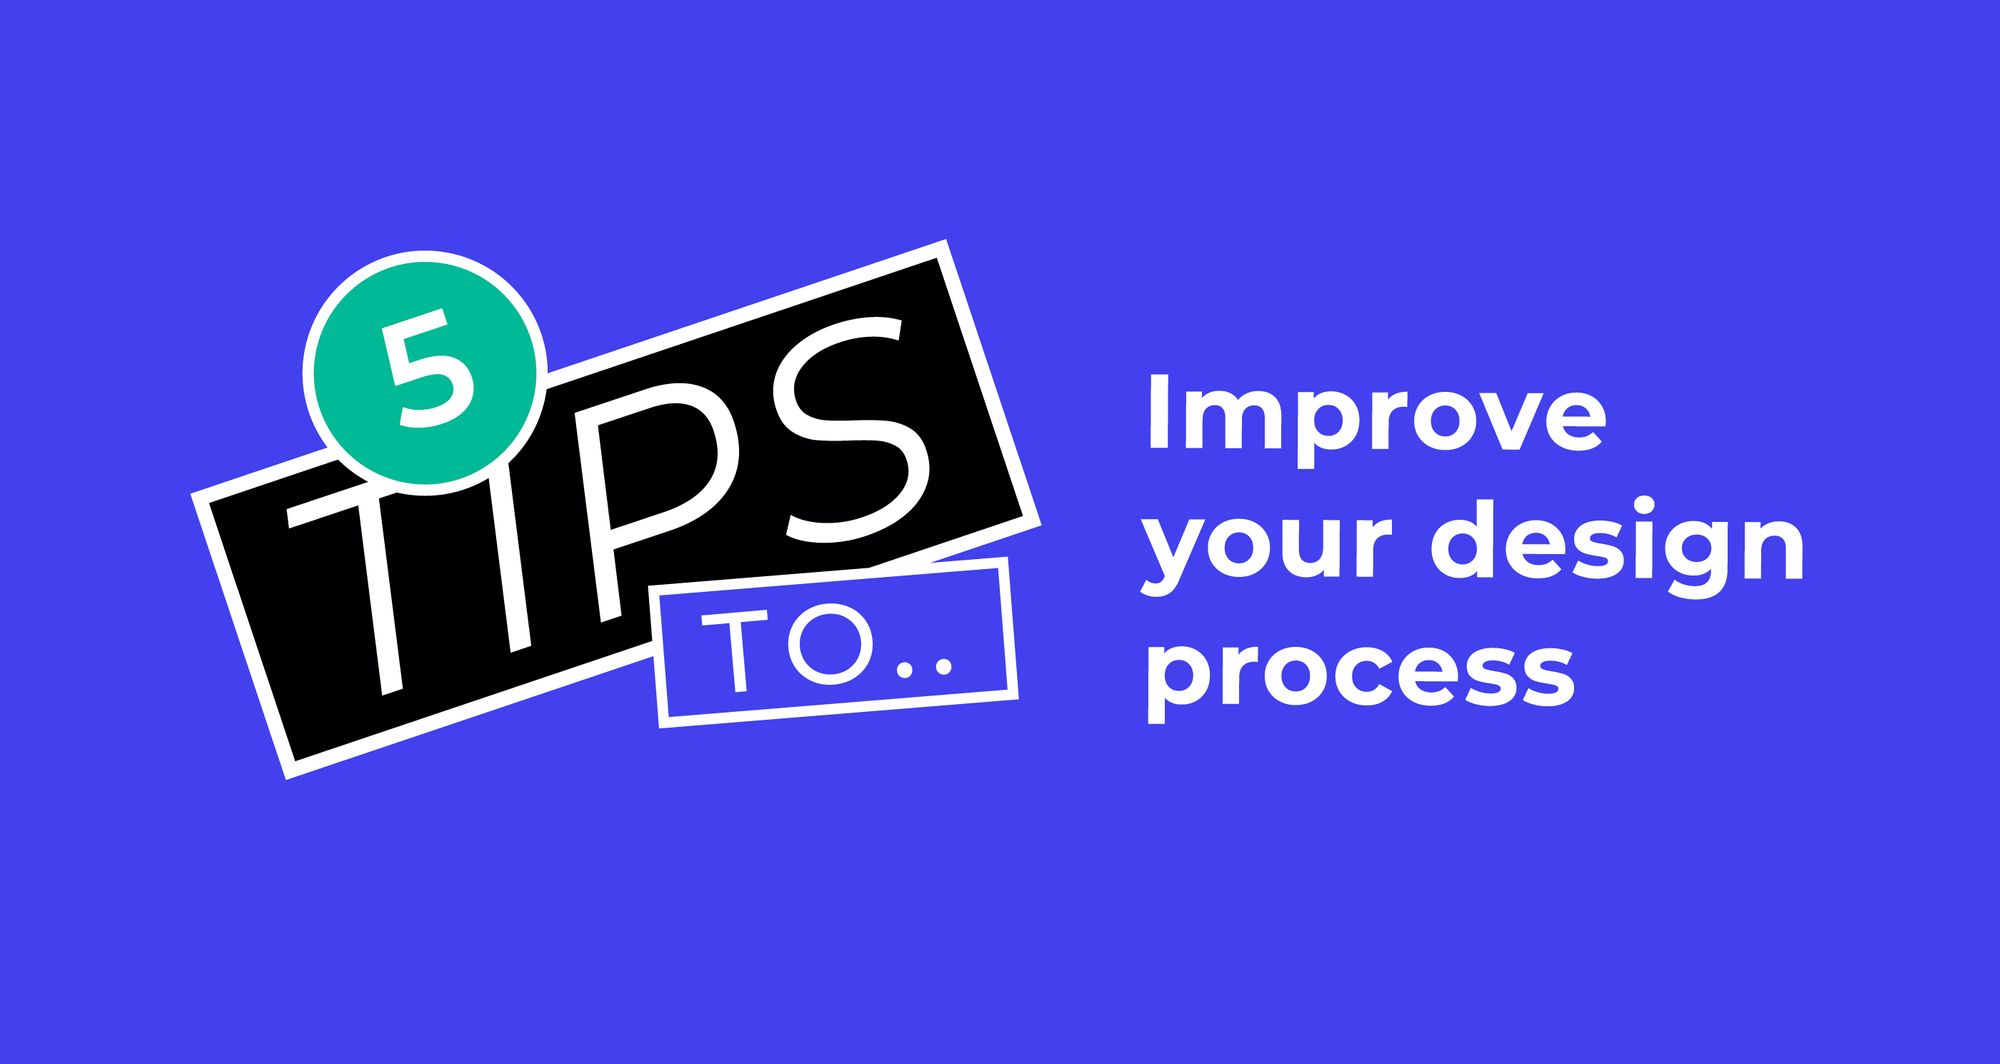 Five top tips to improve your design process